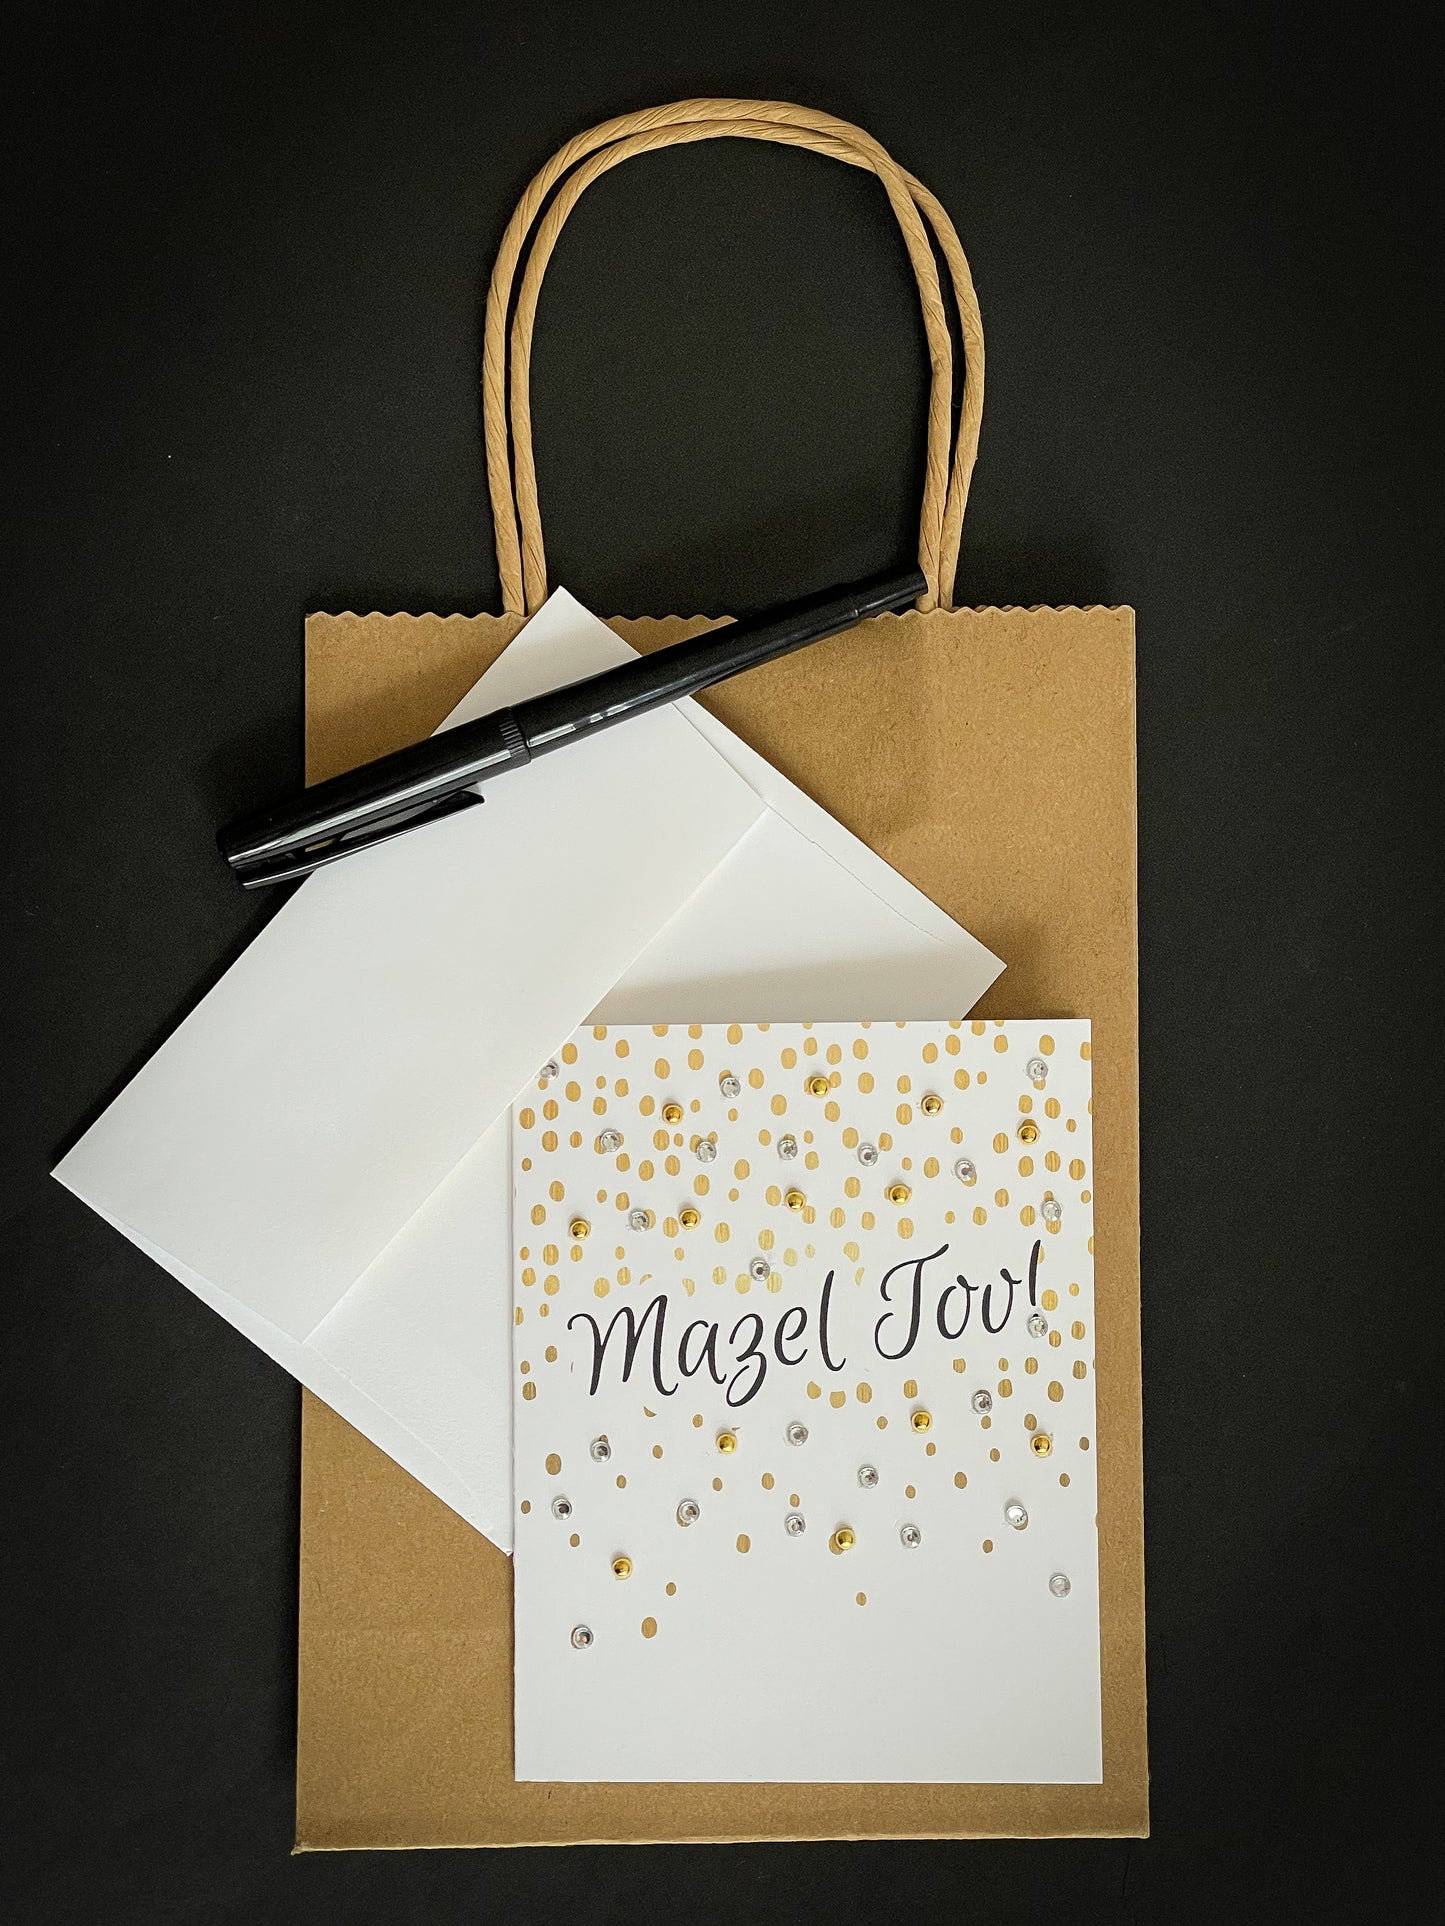 this is a note card on a craft paper gift bag with a white envelope and a black marker , the card says Mazel Tov in black and surrounded by gold confetti design